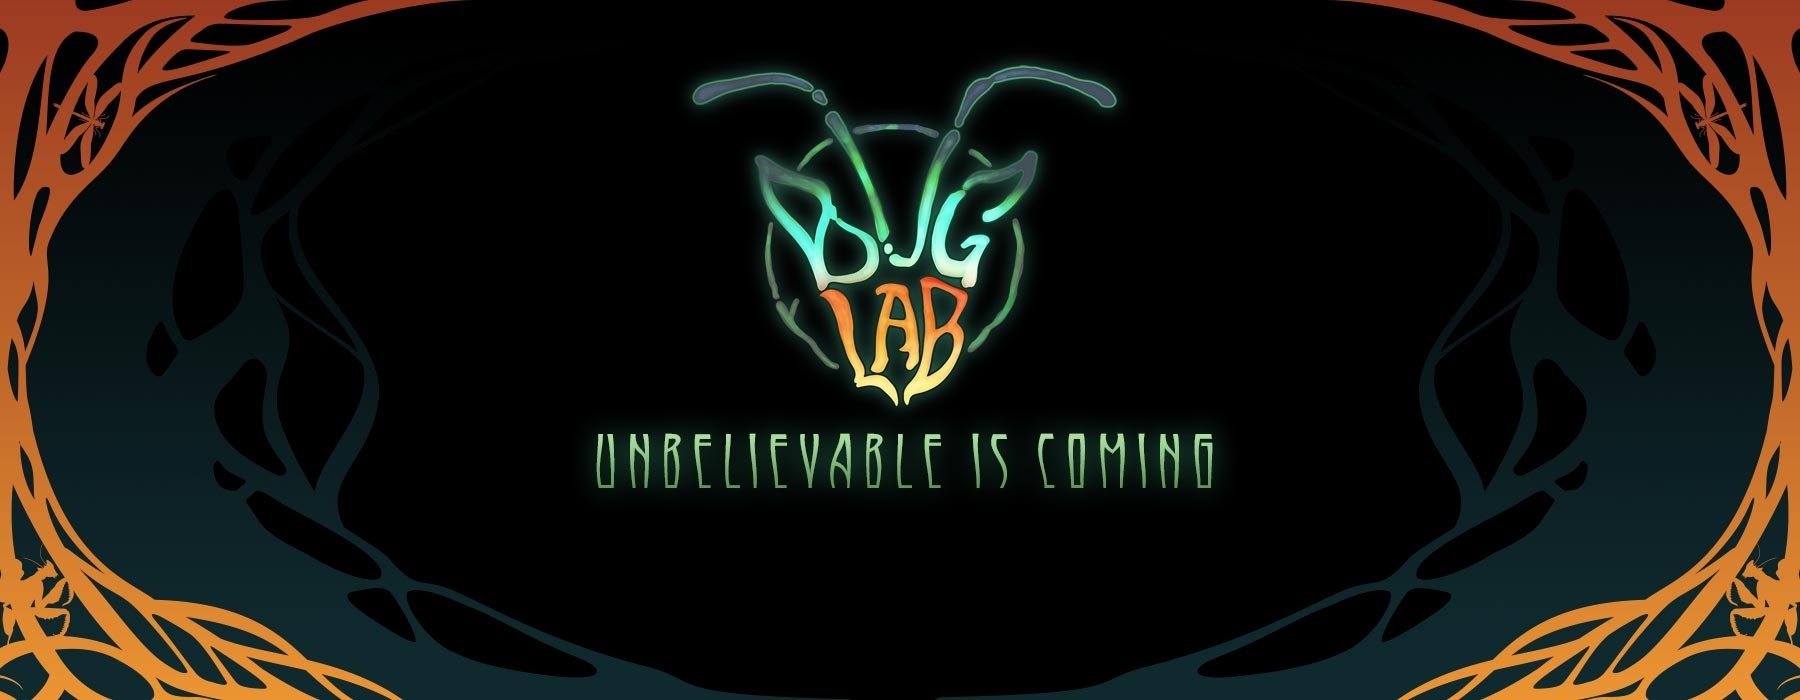 A logo in the shape of a bug's head reads 'Bug Lab' underneath are the words 'unbelievable is coming'.